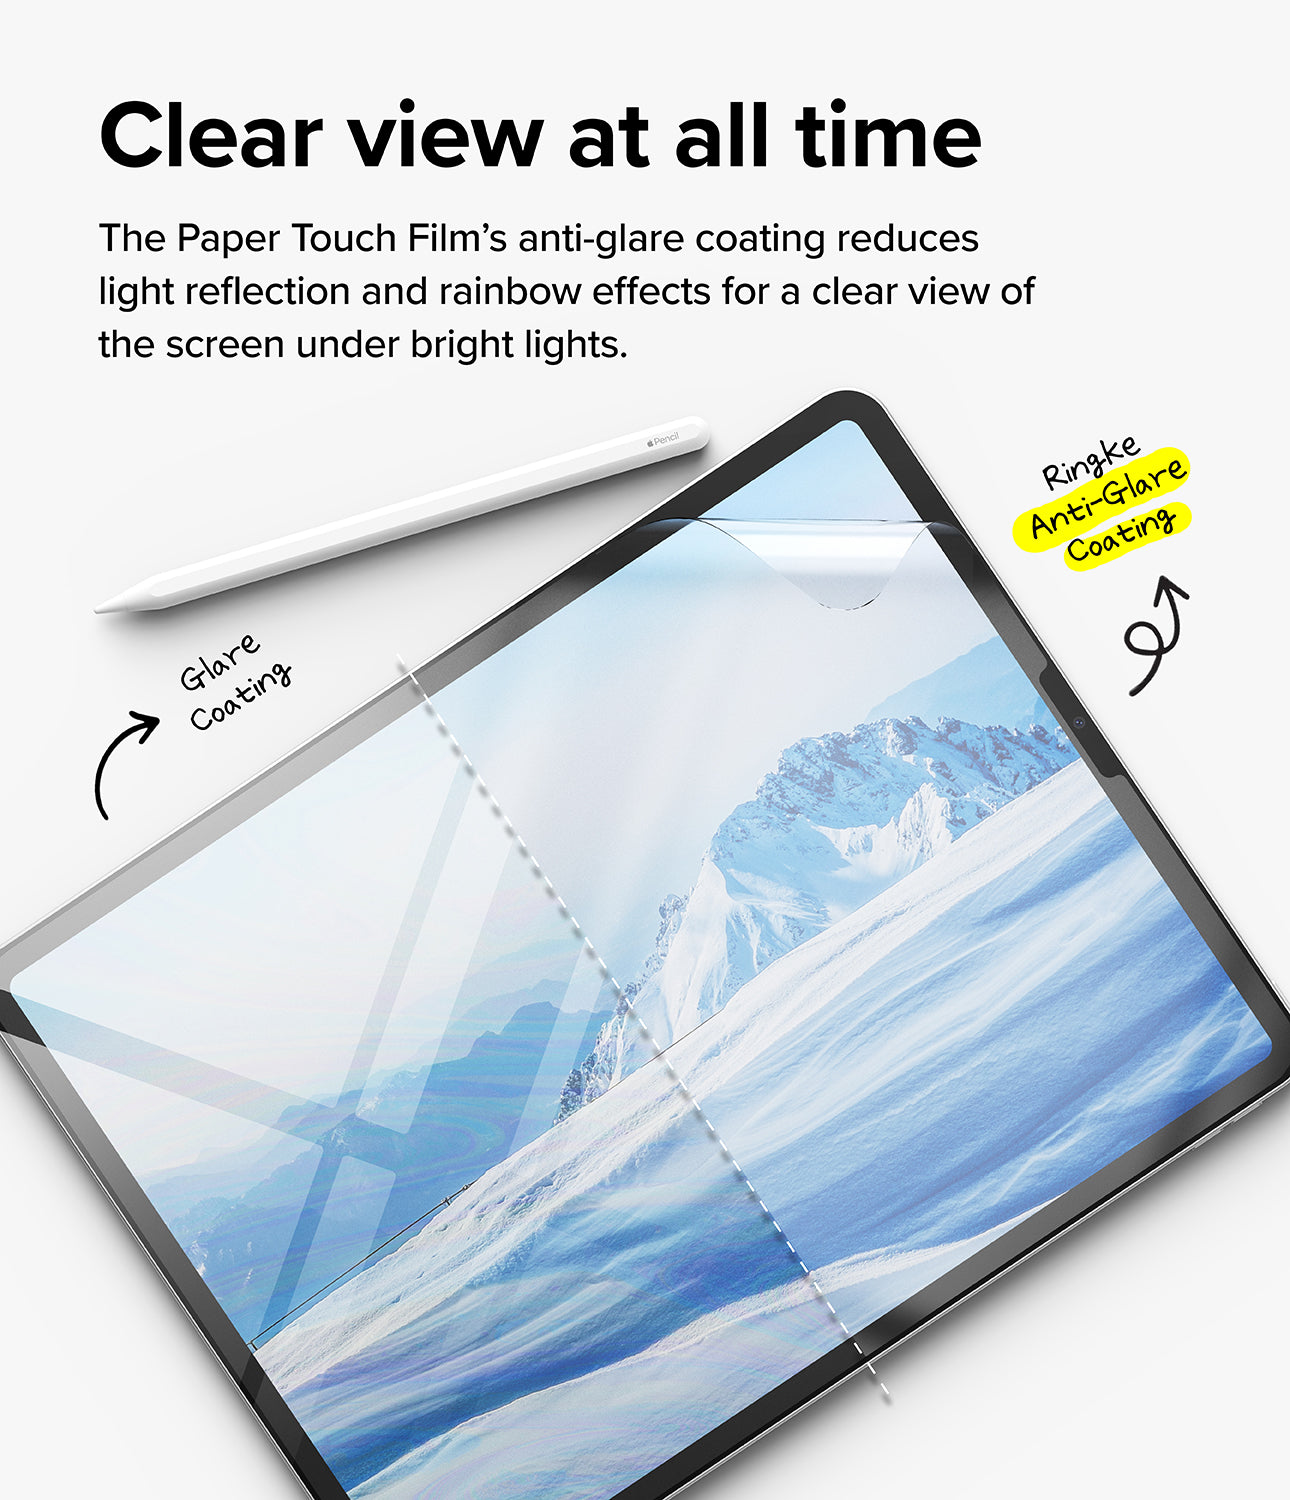 iPad Pro 13" (M4) Screen Protector | Paper Touch Film - Hard - Clear view at all time. The Paper Touch Film's anti-glare coating reduces light reflection and rainbow effects for a clear view of the screen under bright lights.